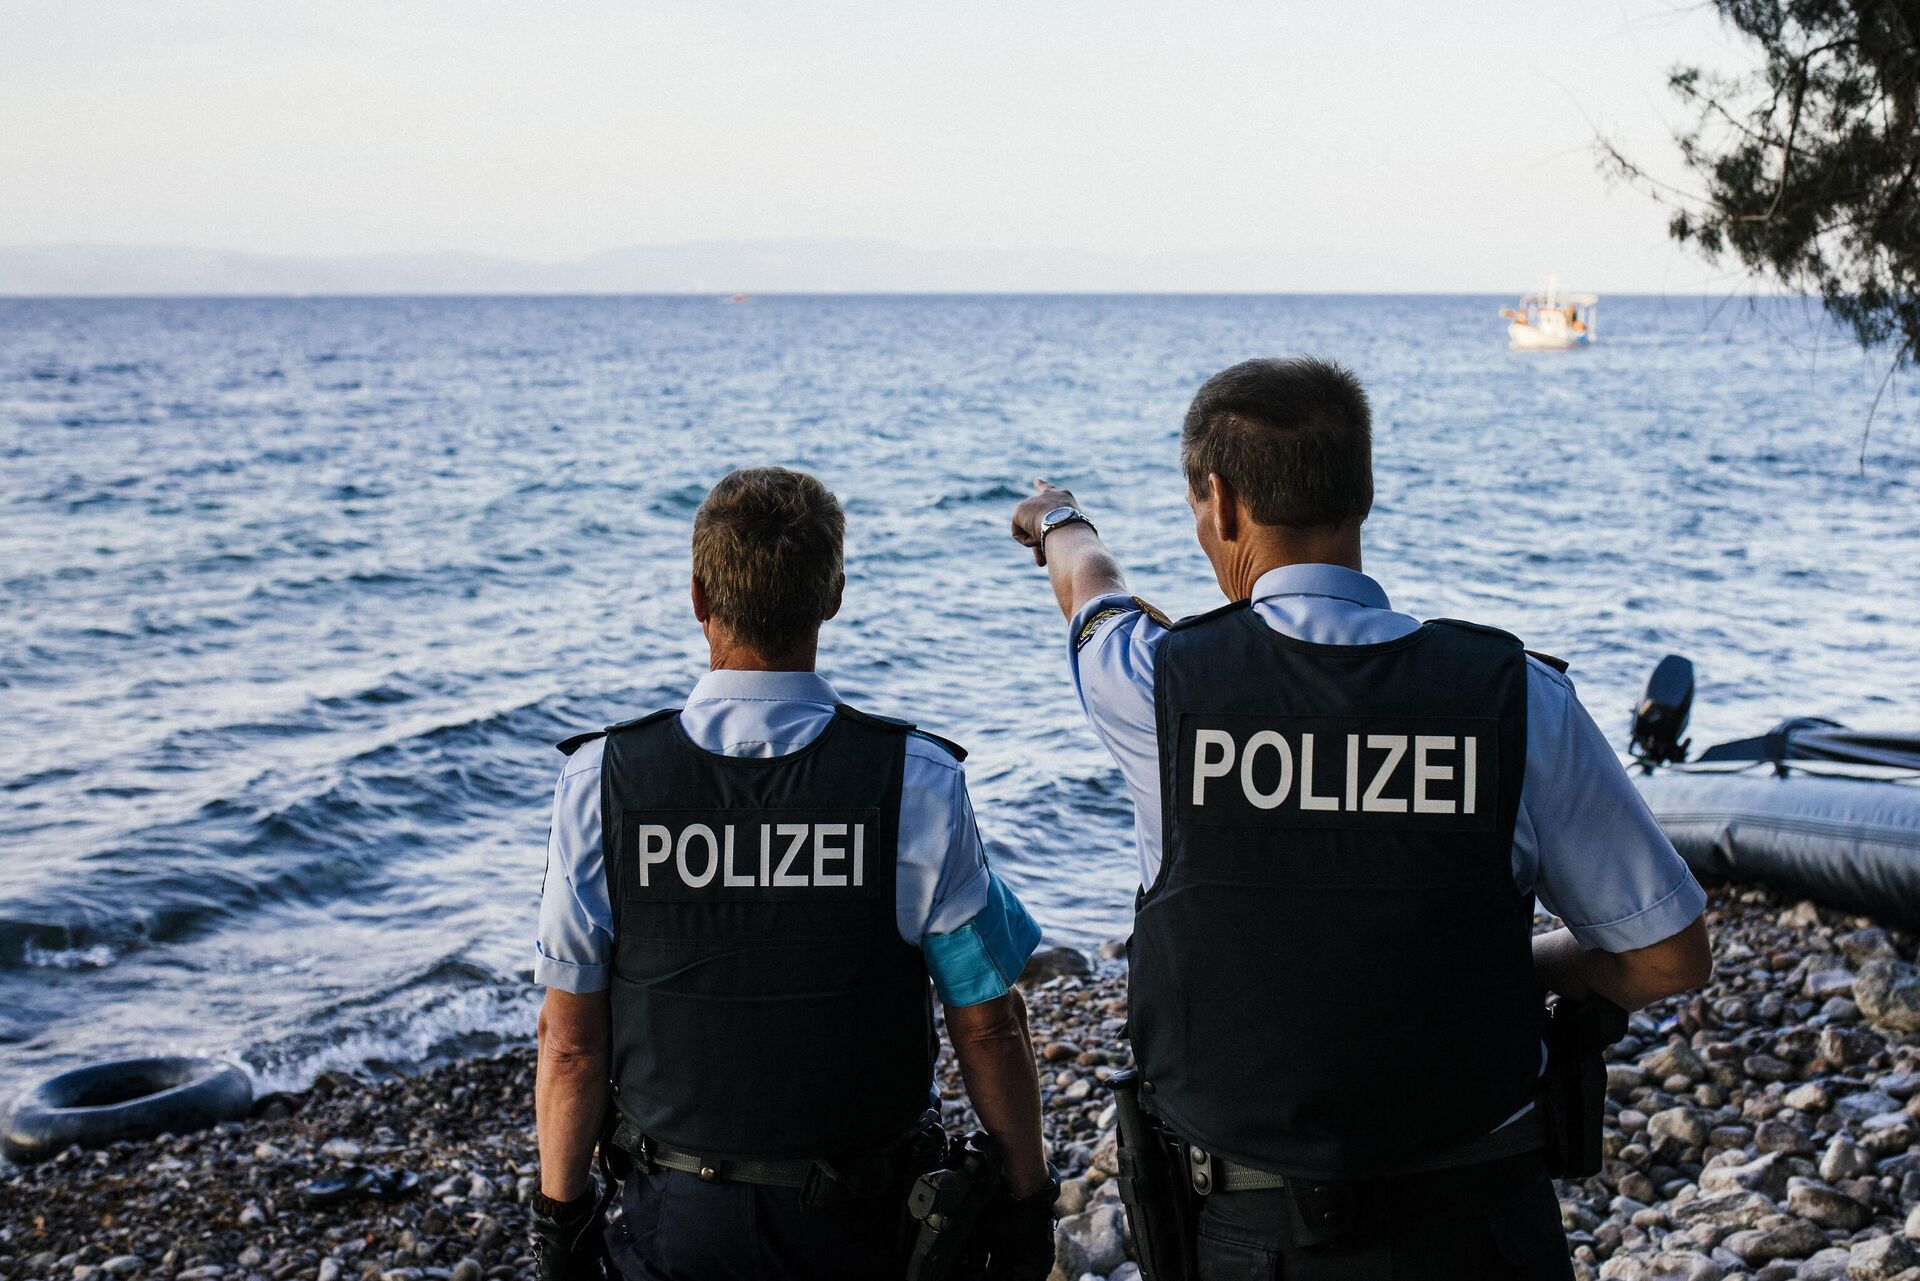 German police officers, representatives of the EU's border management agency Frontex, on the Greek island of Lesbos, look at a dinghy with migrants crossing the Aegean sea from Turkey, on October 17, 2015. - Sputnik International, 1920, 06.12.2022